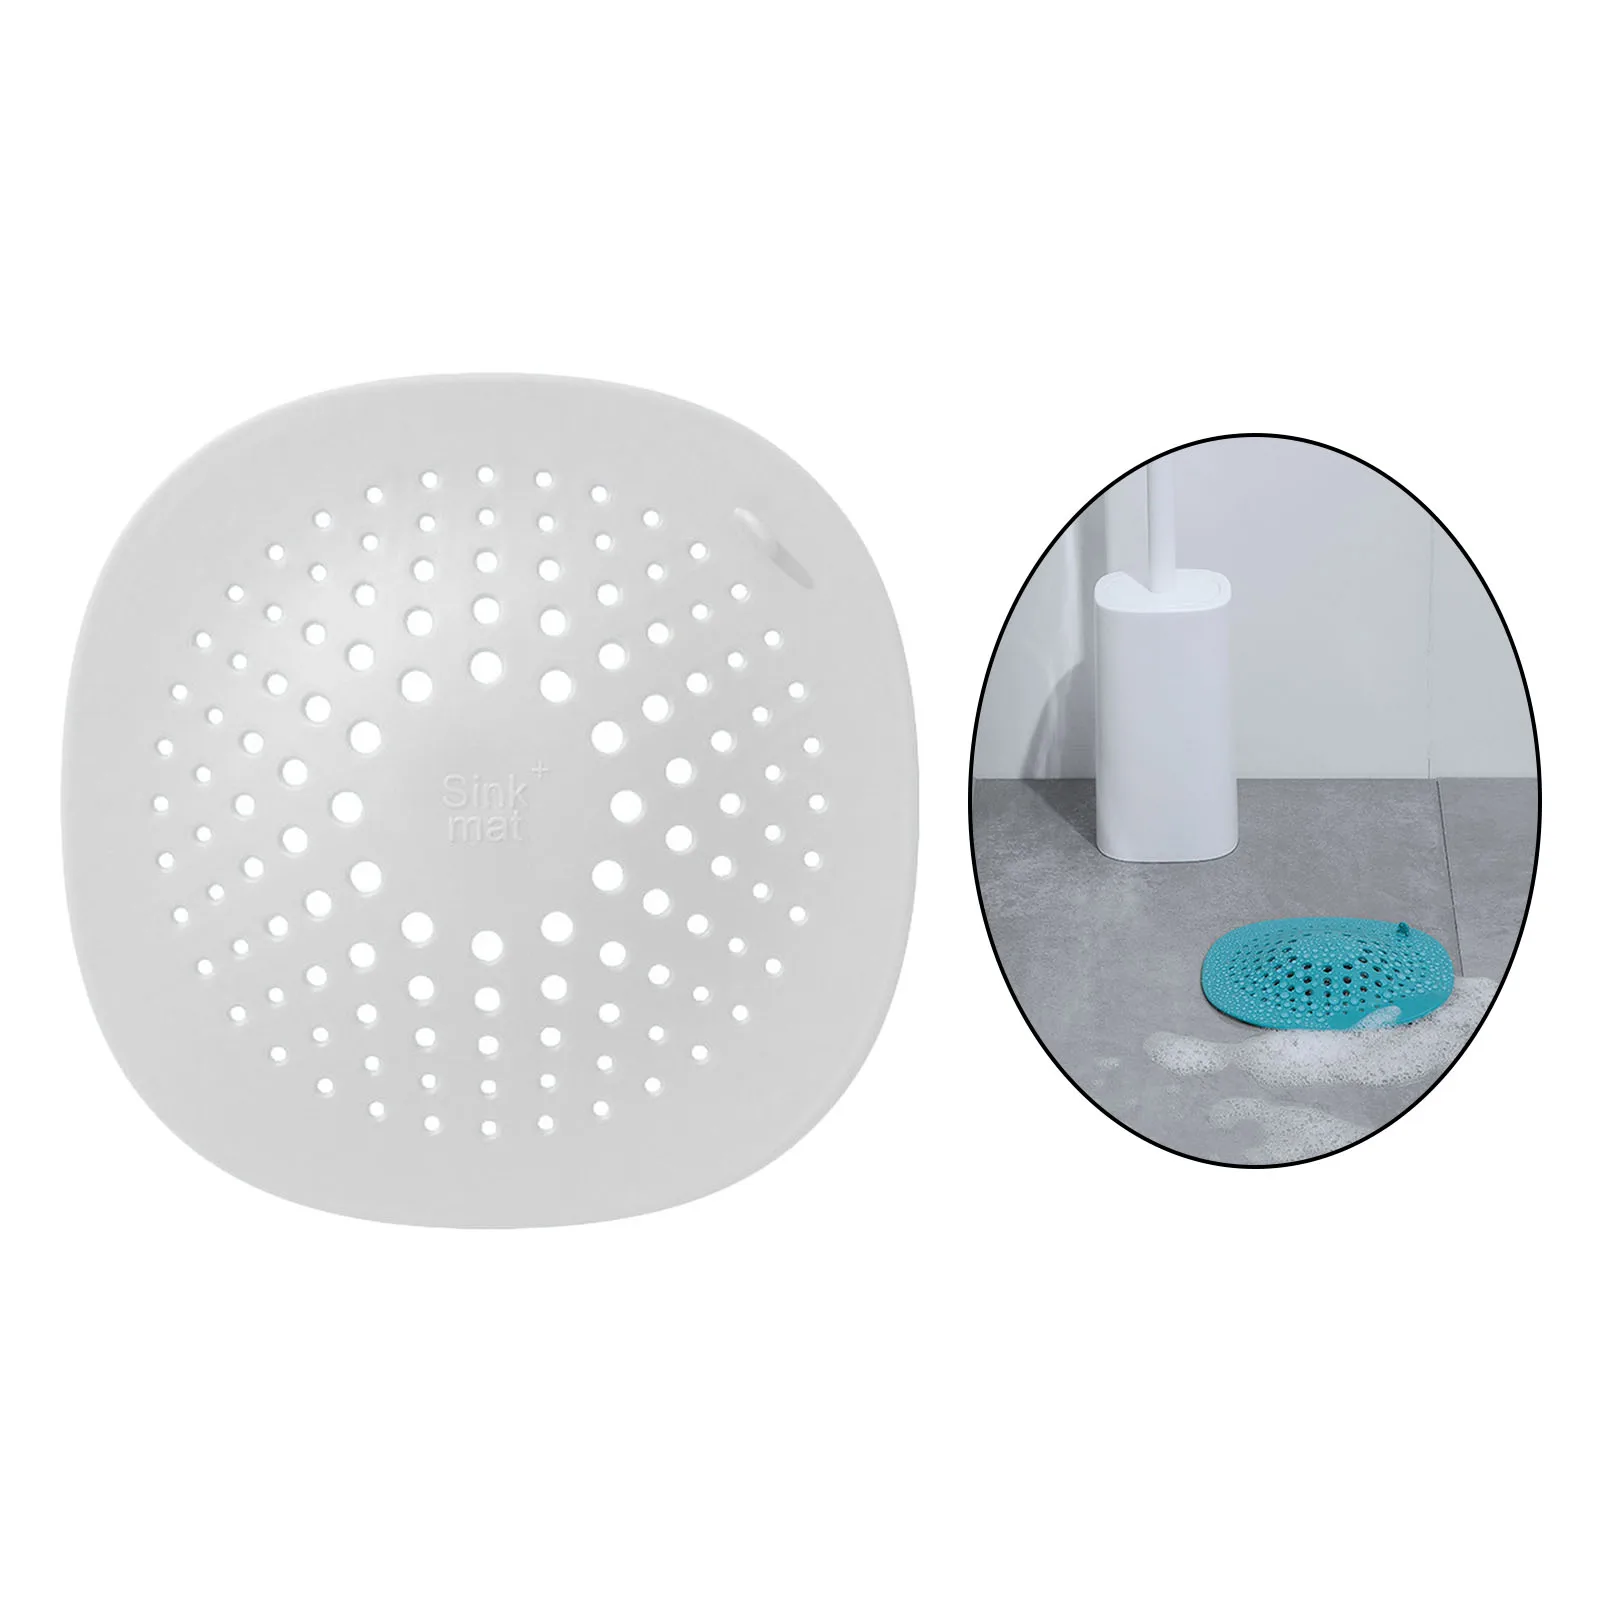 Kitchen Drain Hair Catcher w/Suction Cups Bath Stopper Sink Strainer Water Trap Cover Flexible